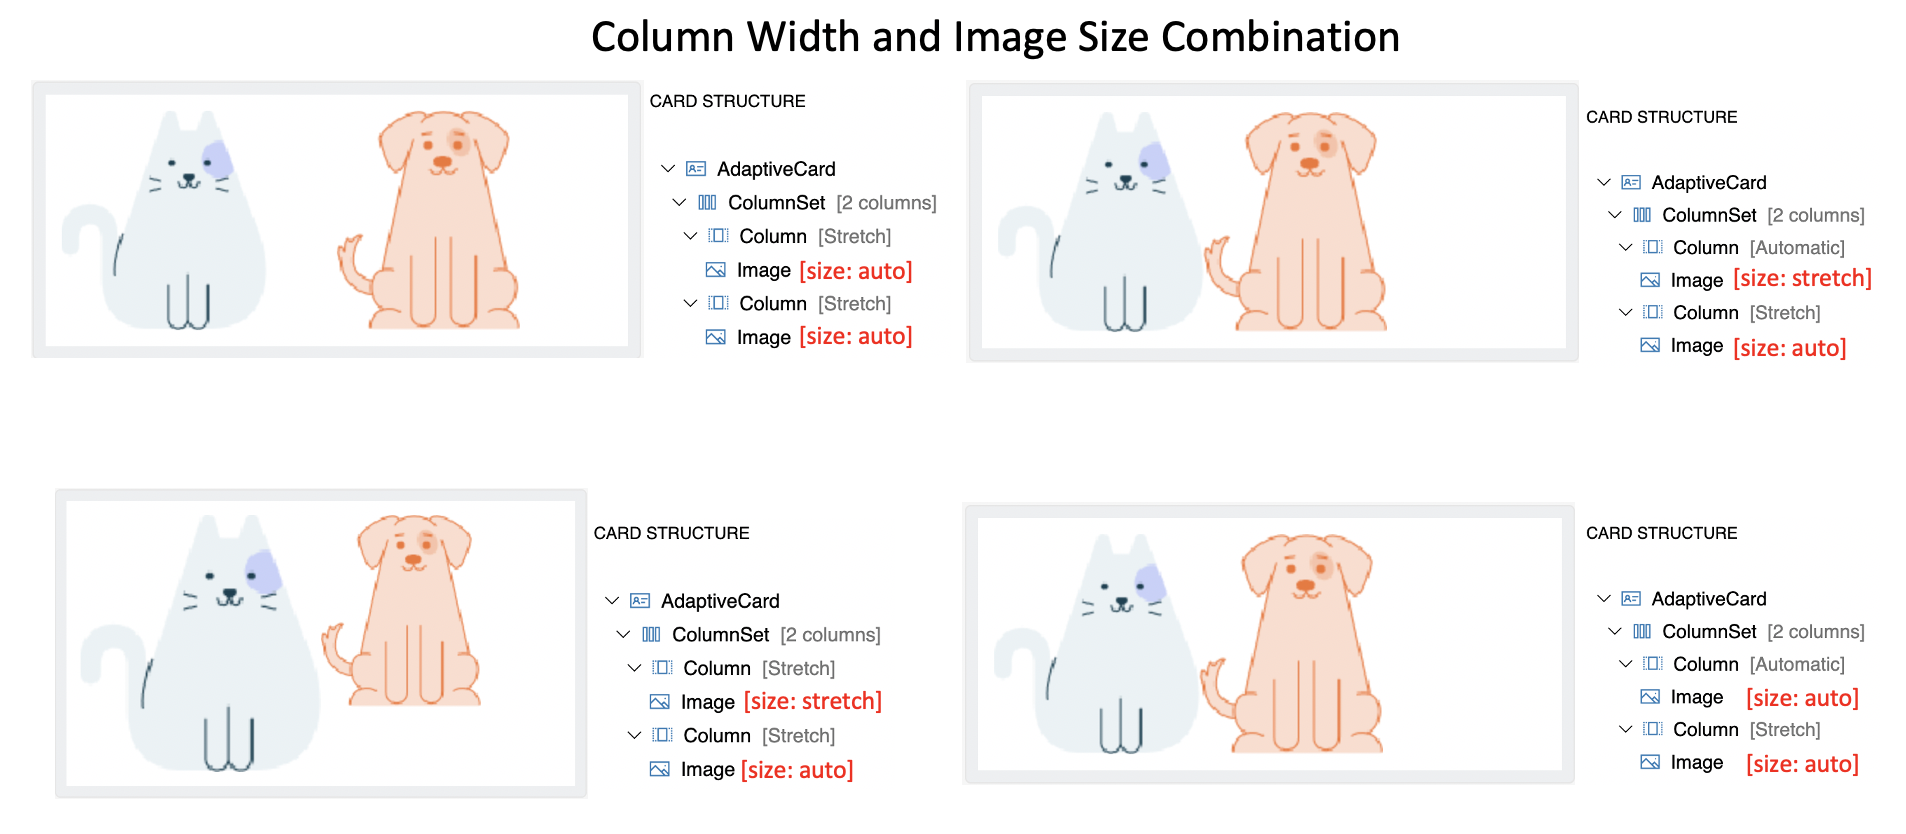 Column width and image size combination